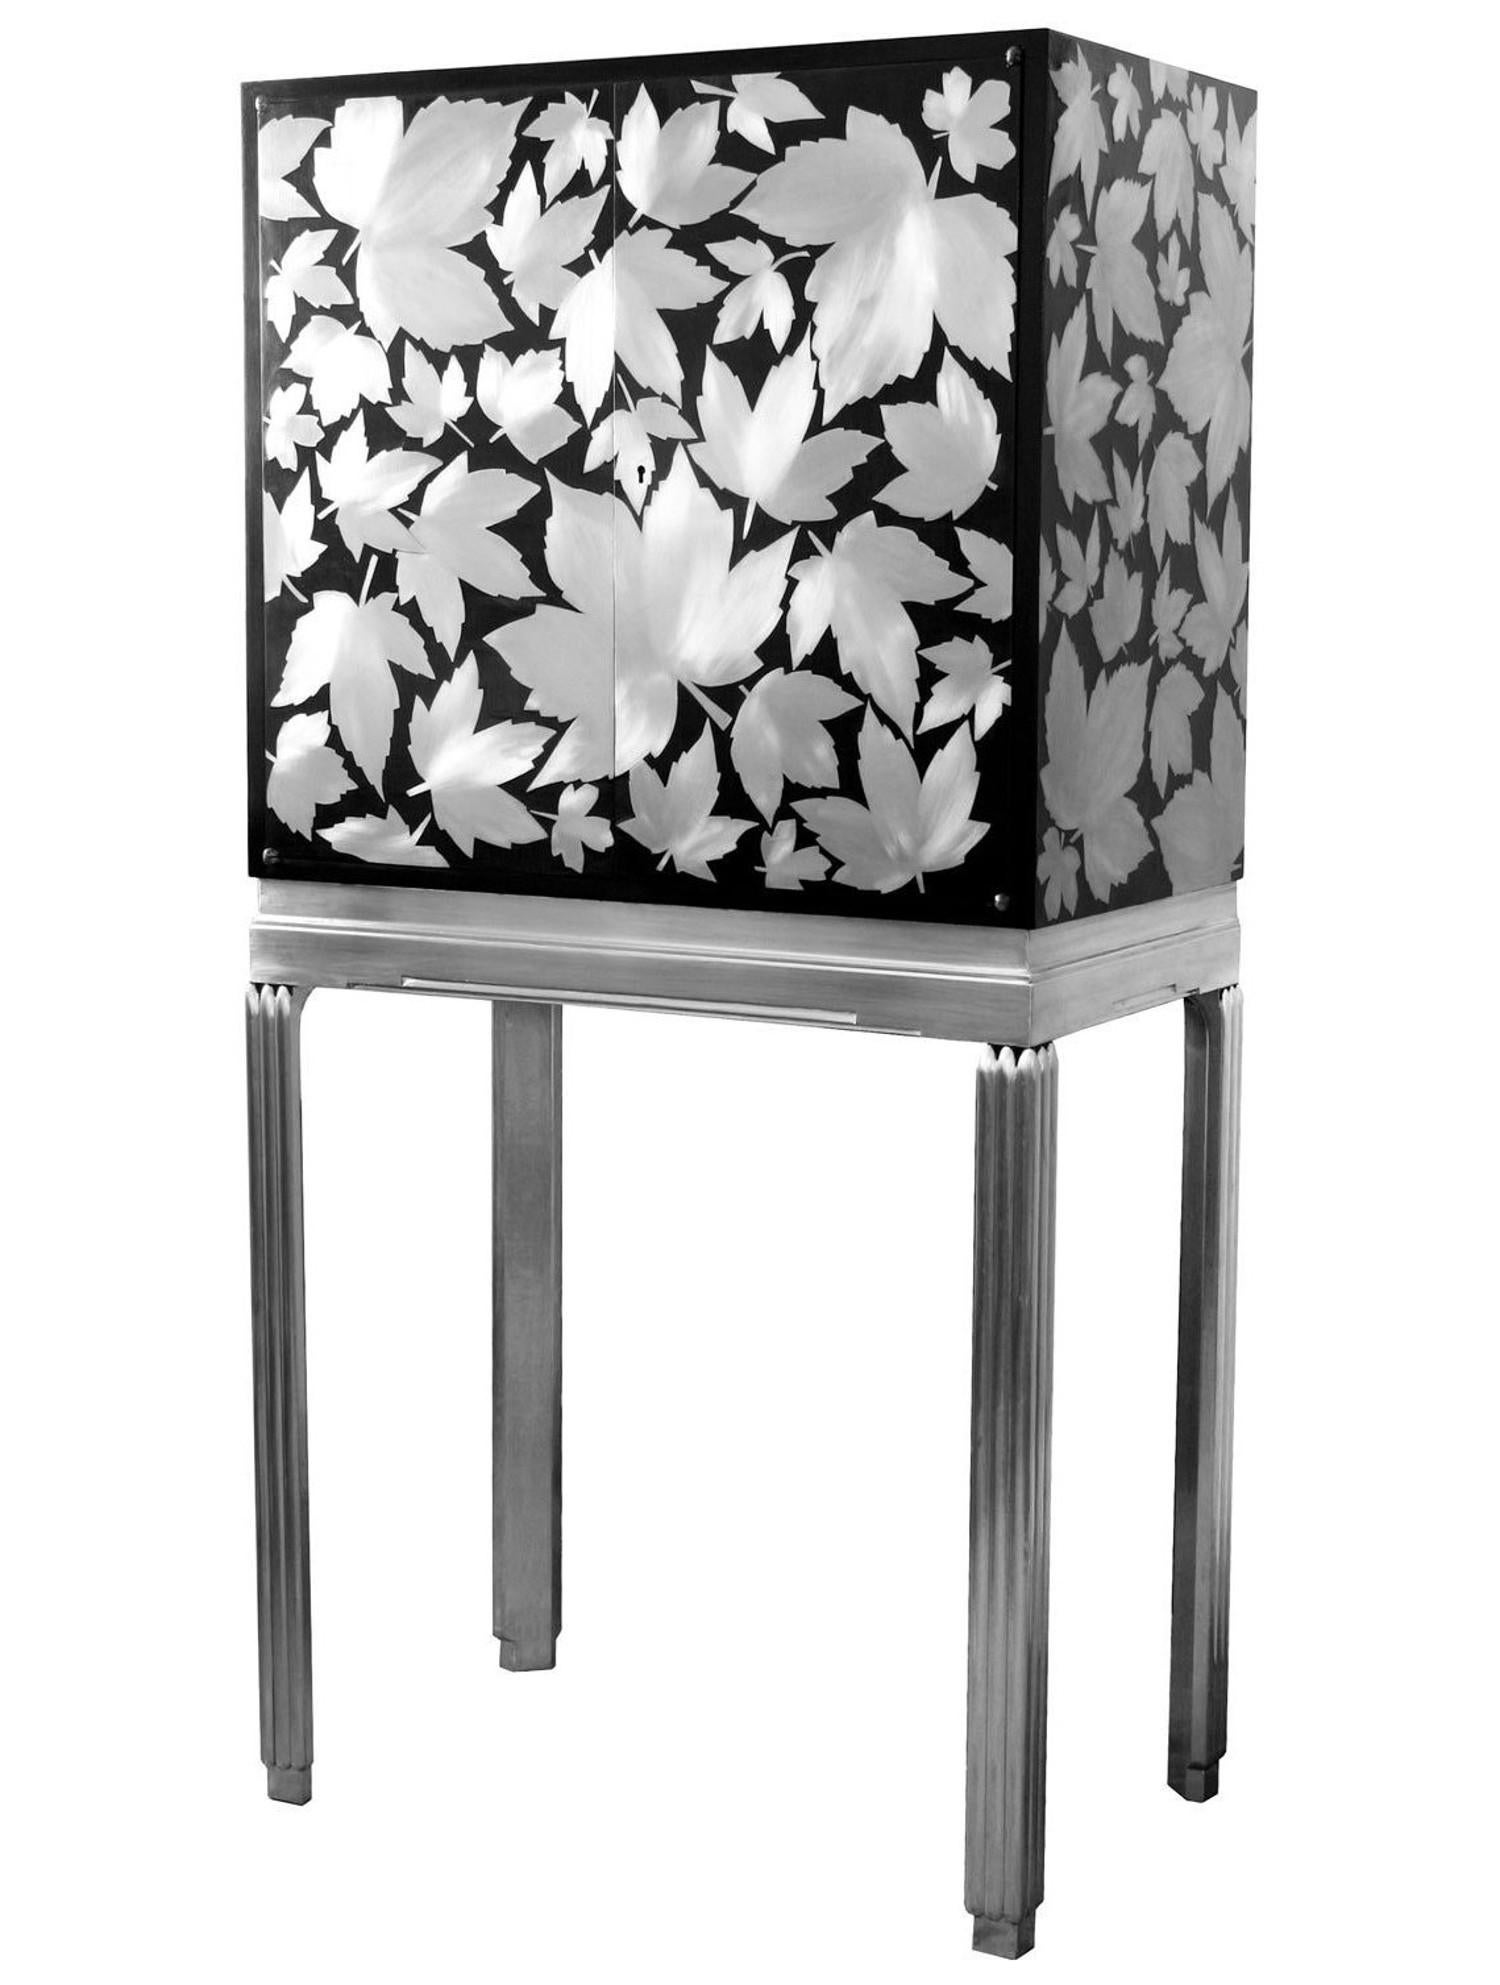 
 An Art Deco cocktail cabinet that has been reconditioned and reimagined by designer and maker Kate Noakes. Kate uses a unique process that she has developed of cutting her original designs in sheet metal that are applied onto existing furniture